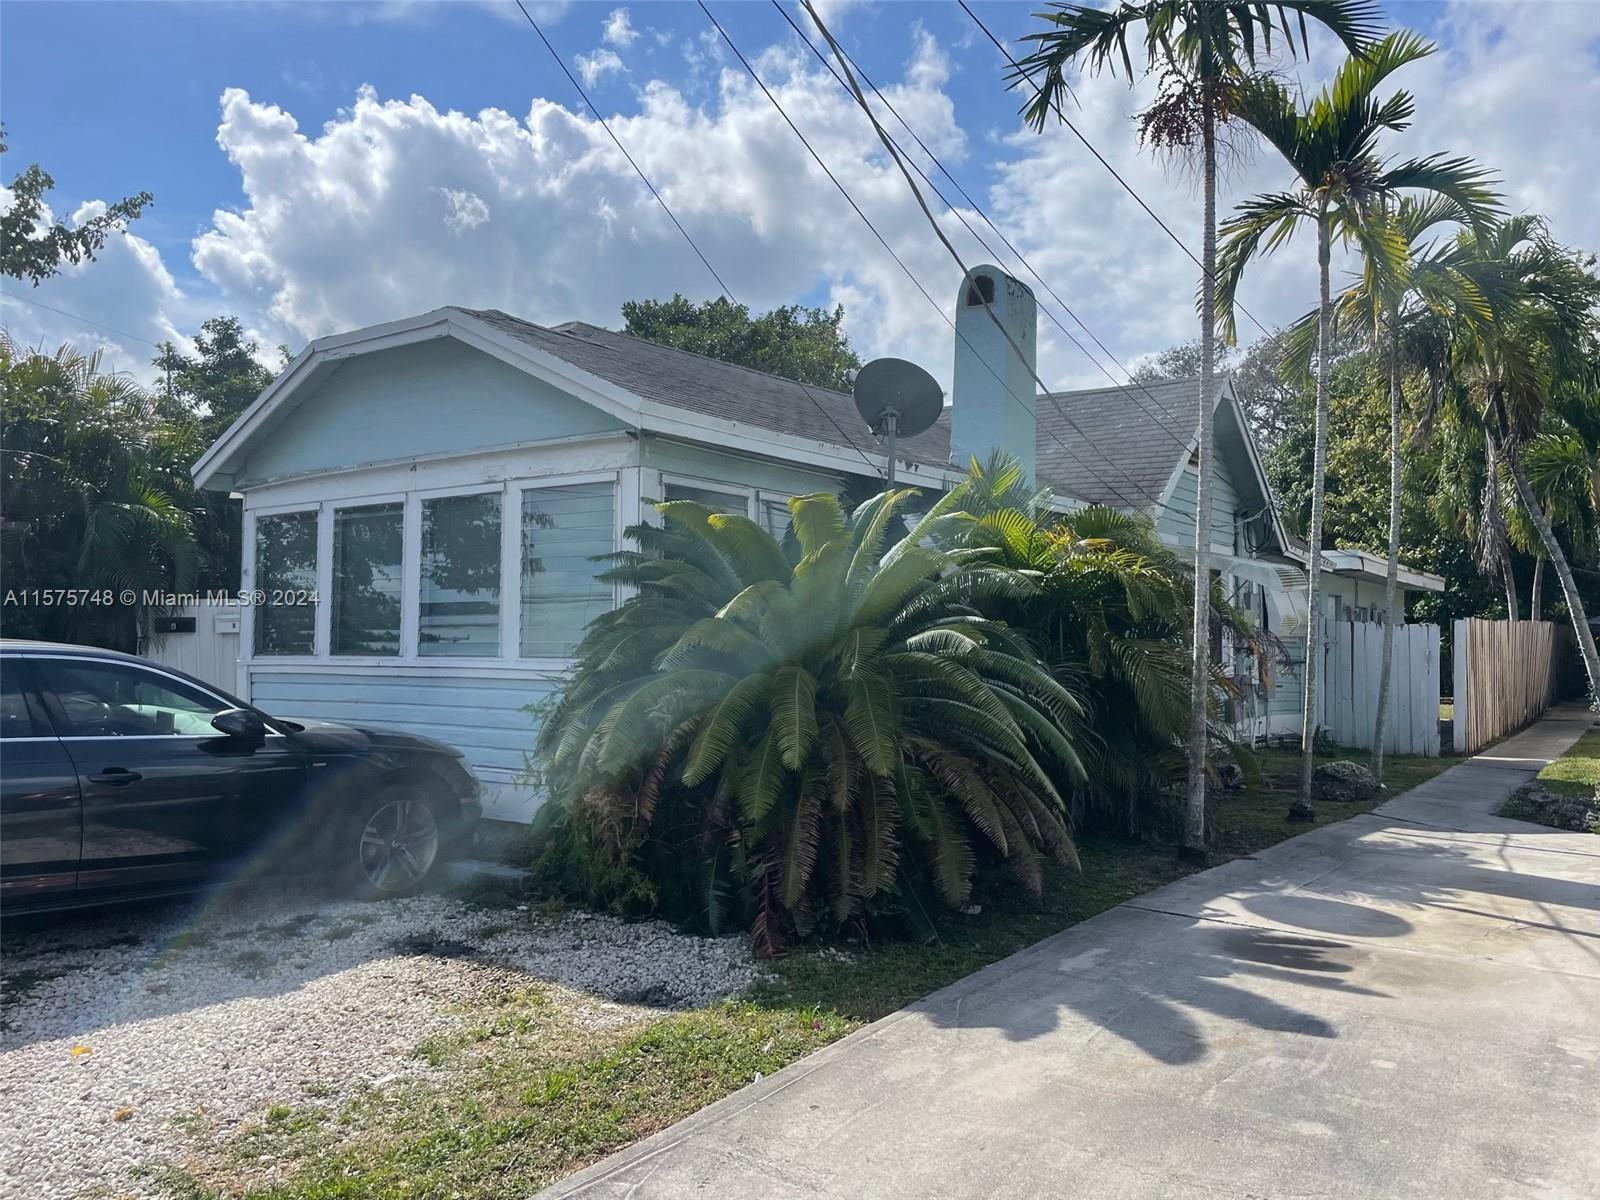 Photo of 1212 N 22nd Ave in Hollywood, FL